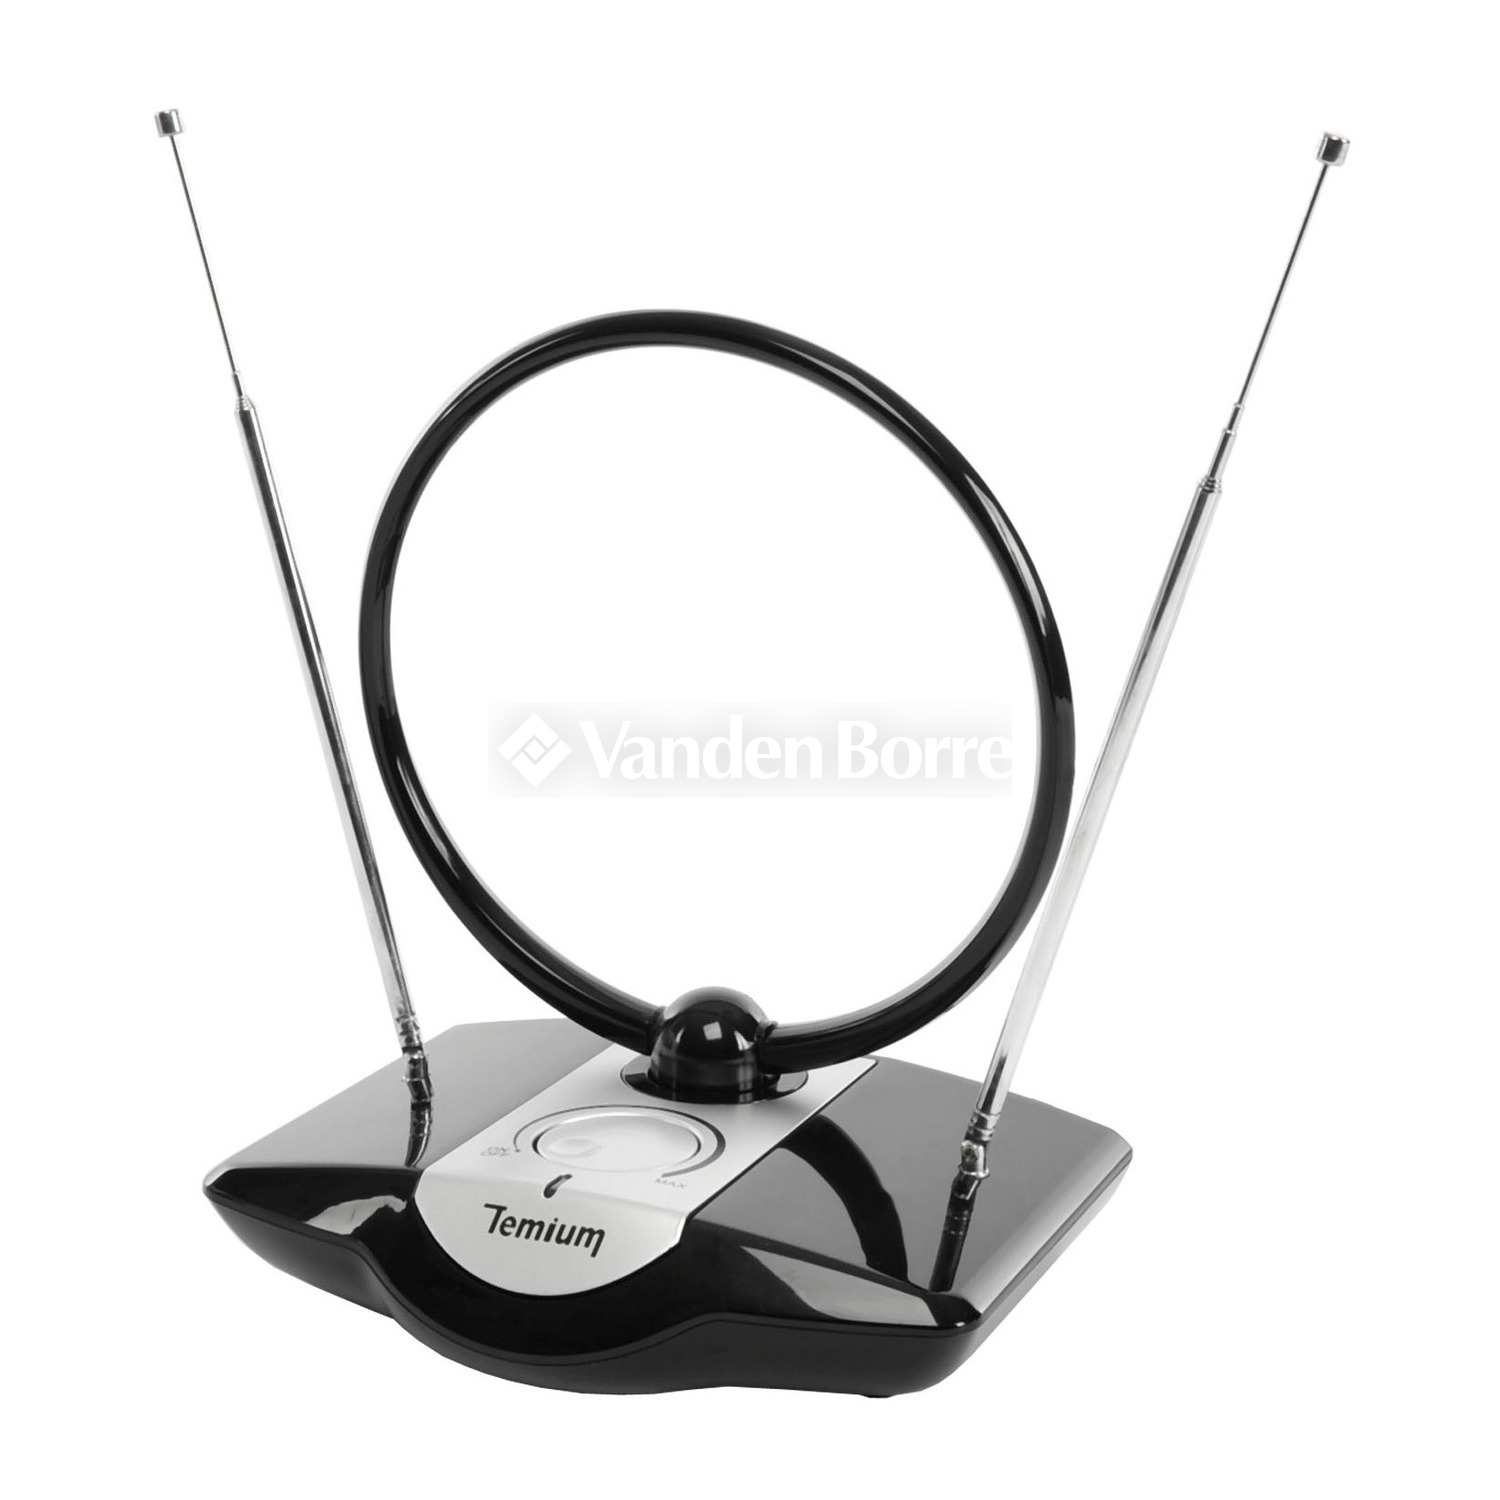 Antenne TV / TNT One For All ANTENNE TV INTERIEUR SV9455 5G sur